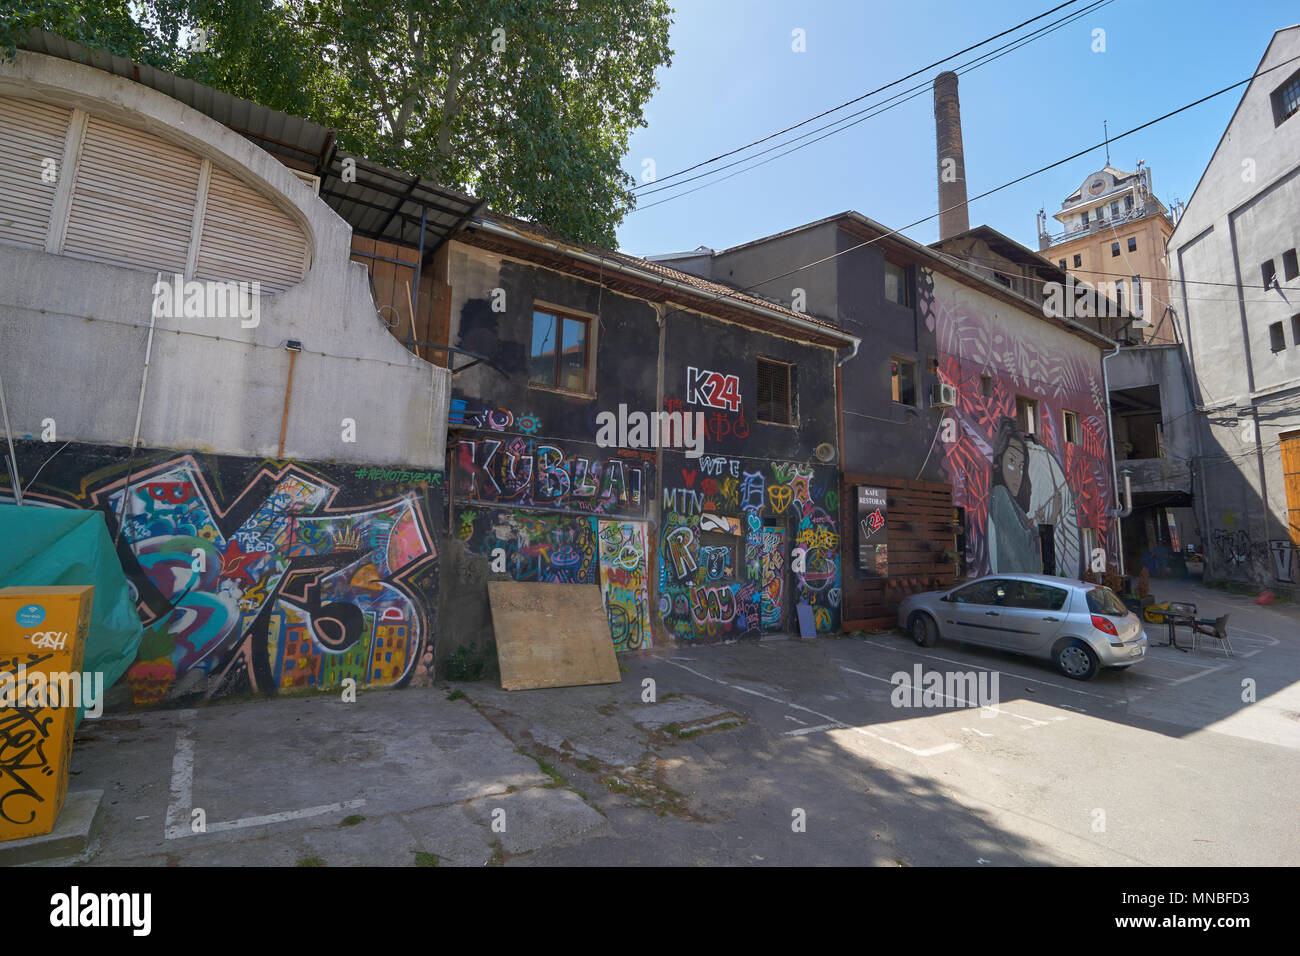 Belgrade, Serbia - May 02, 2018: Street view on cafe and restaurant Stock Photo